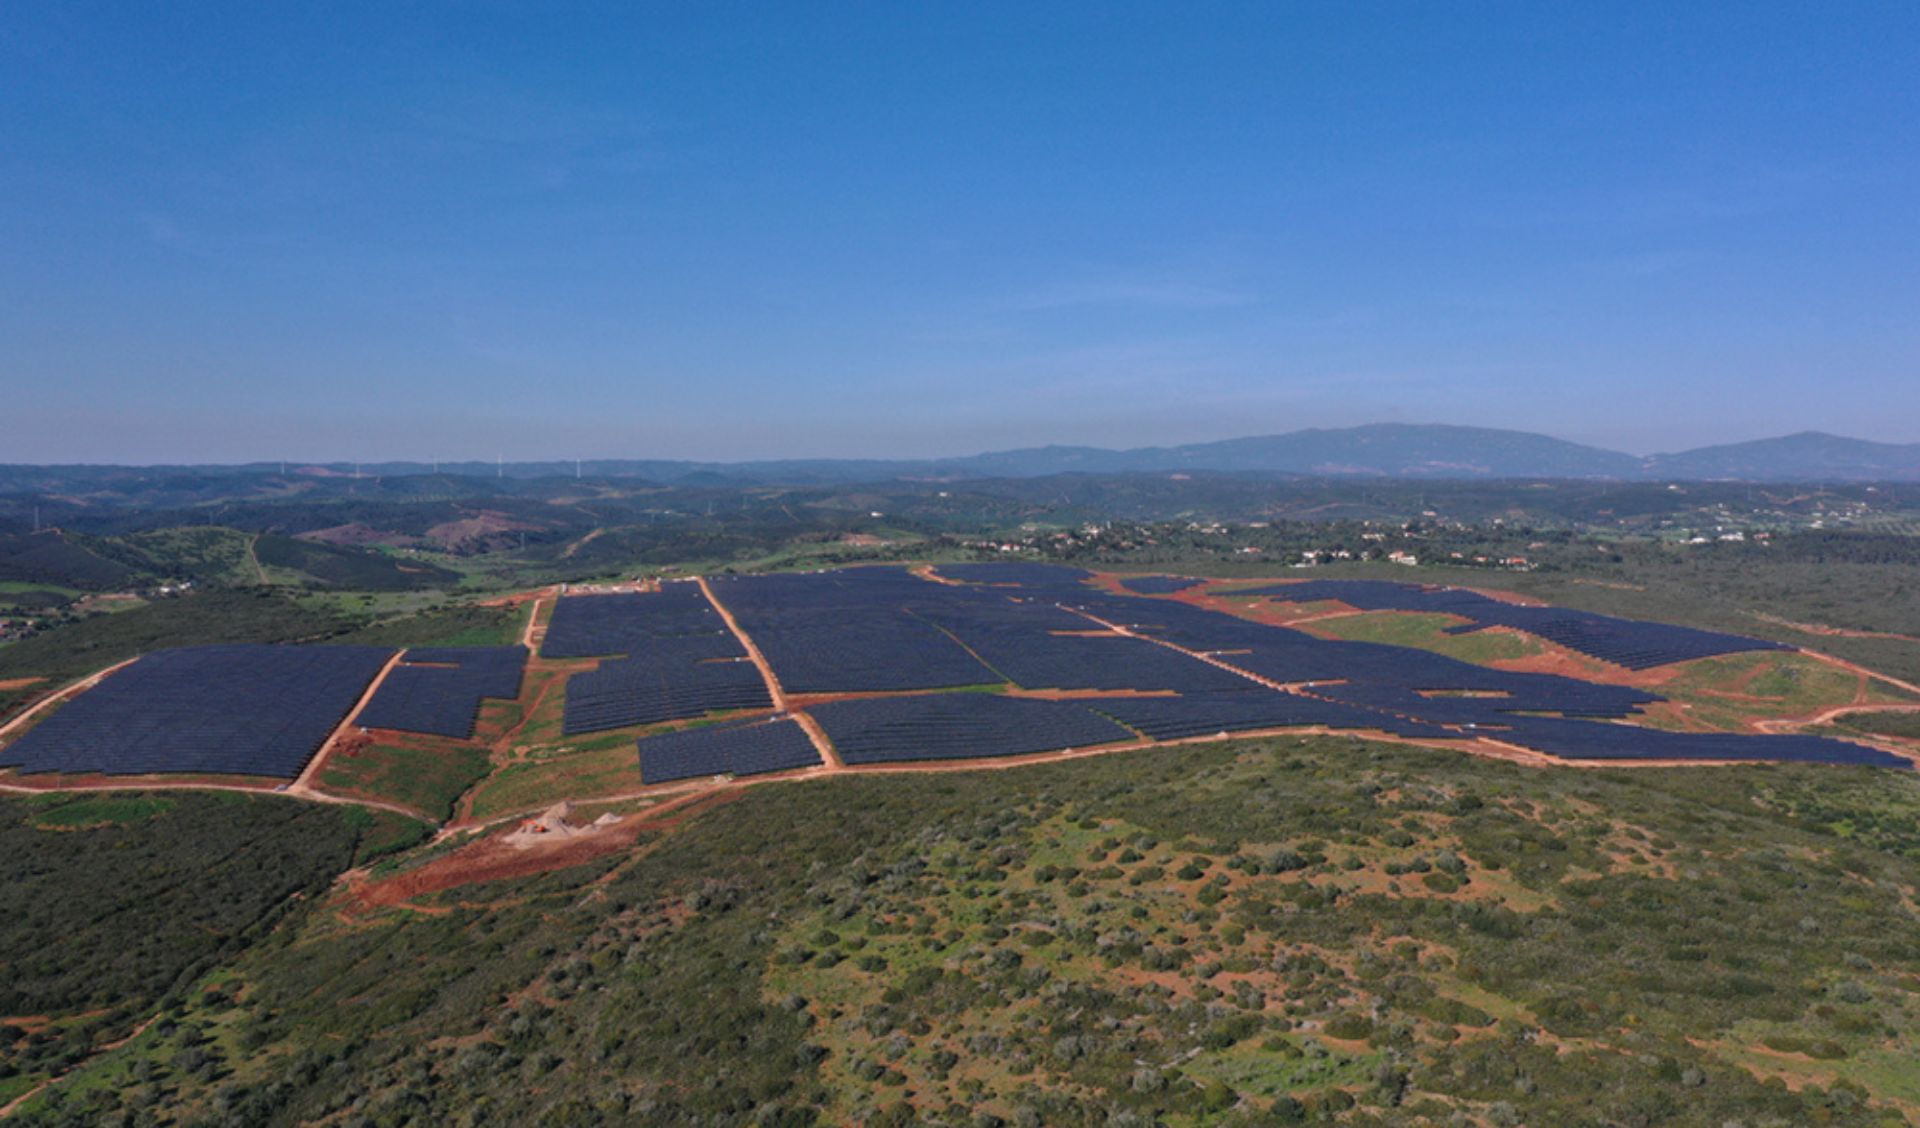 LAGOS SOLAR PLANT – COMPLETION OF ONE OF THE LARGEST SOLAR PROJECTS IN PORTUGAL.